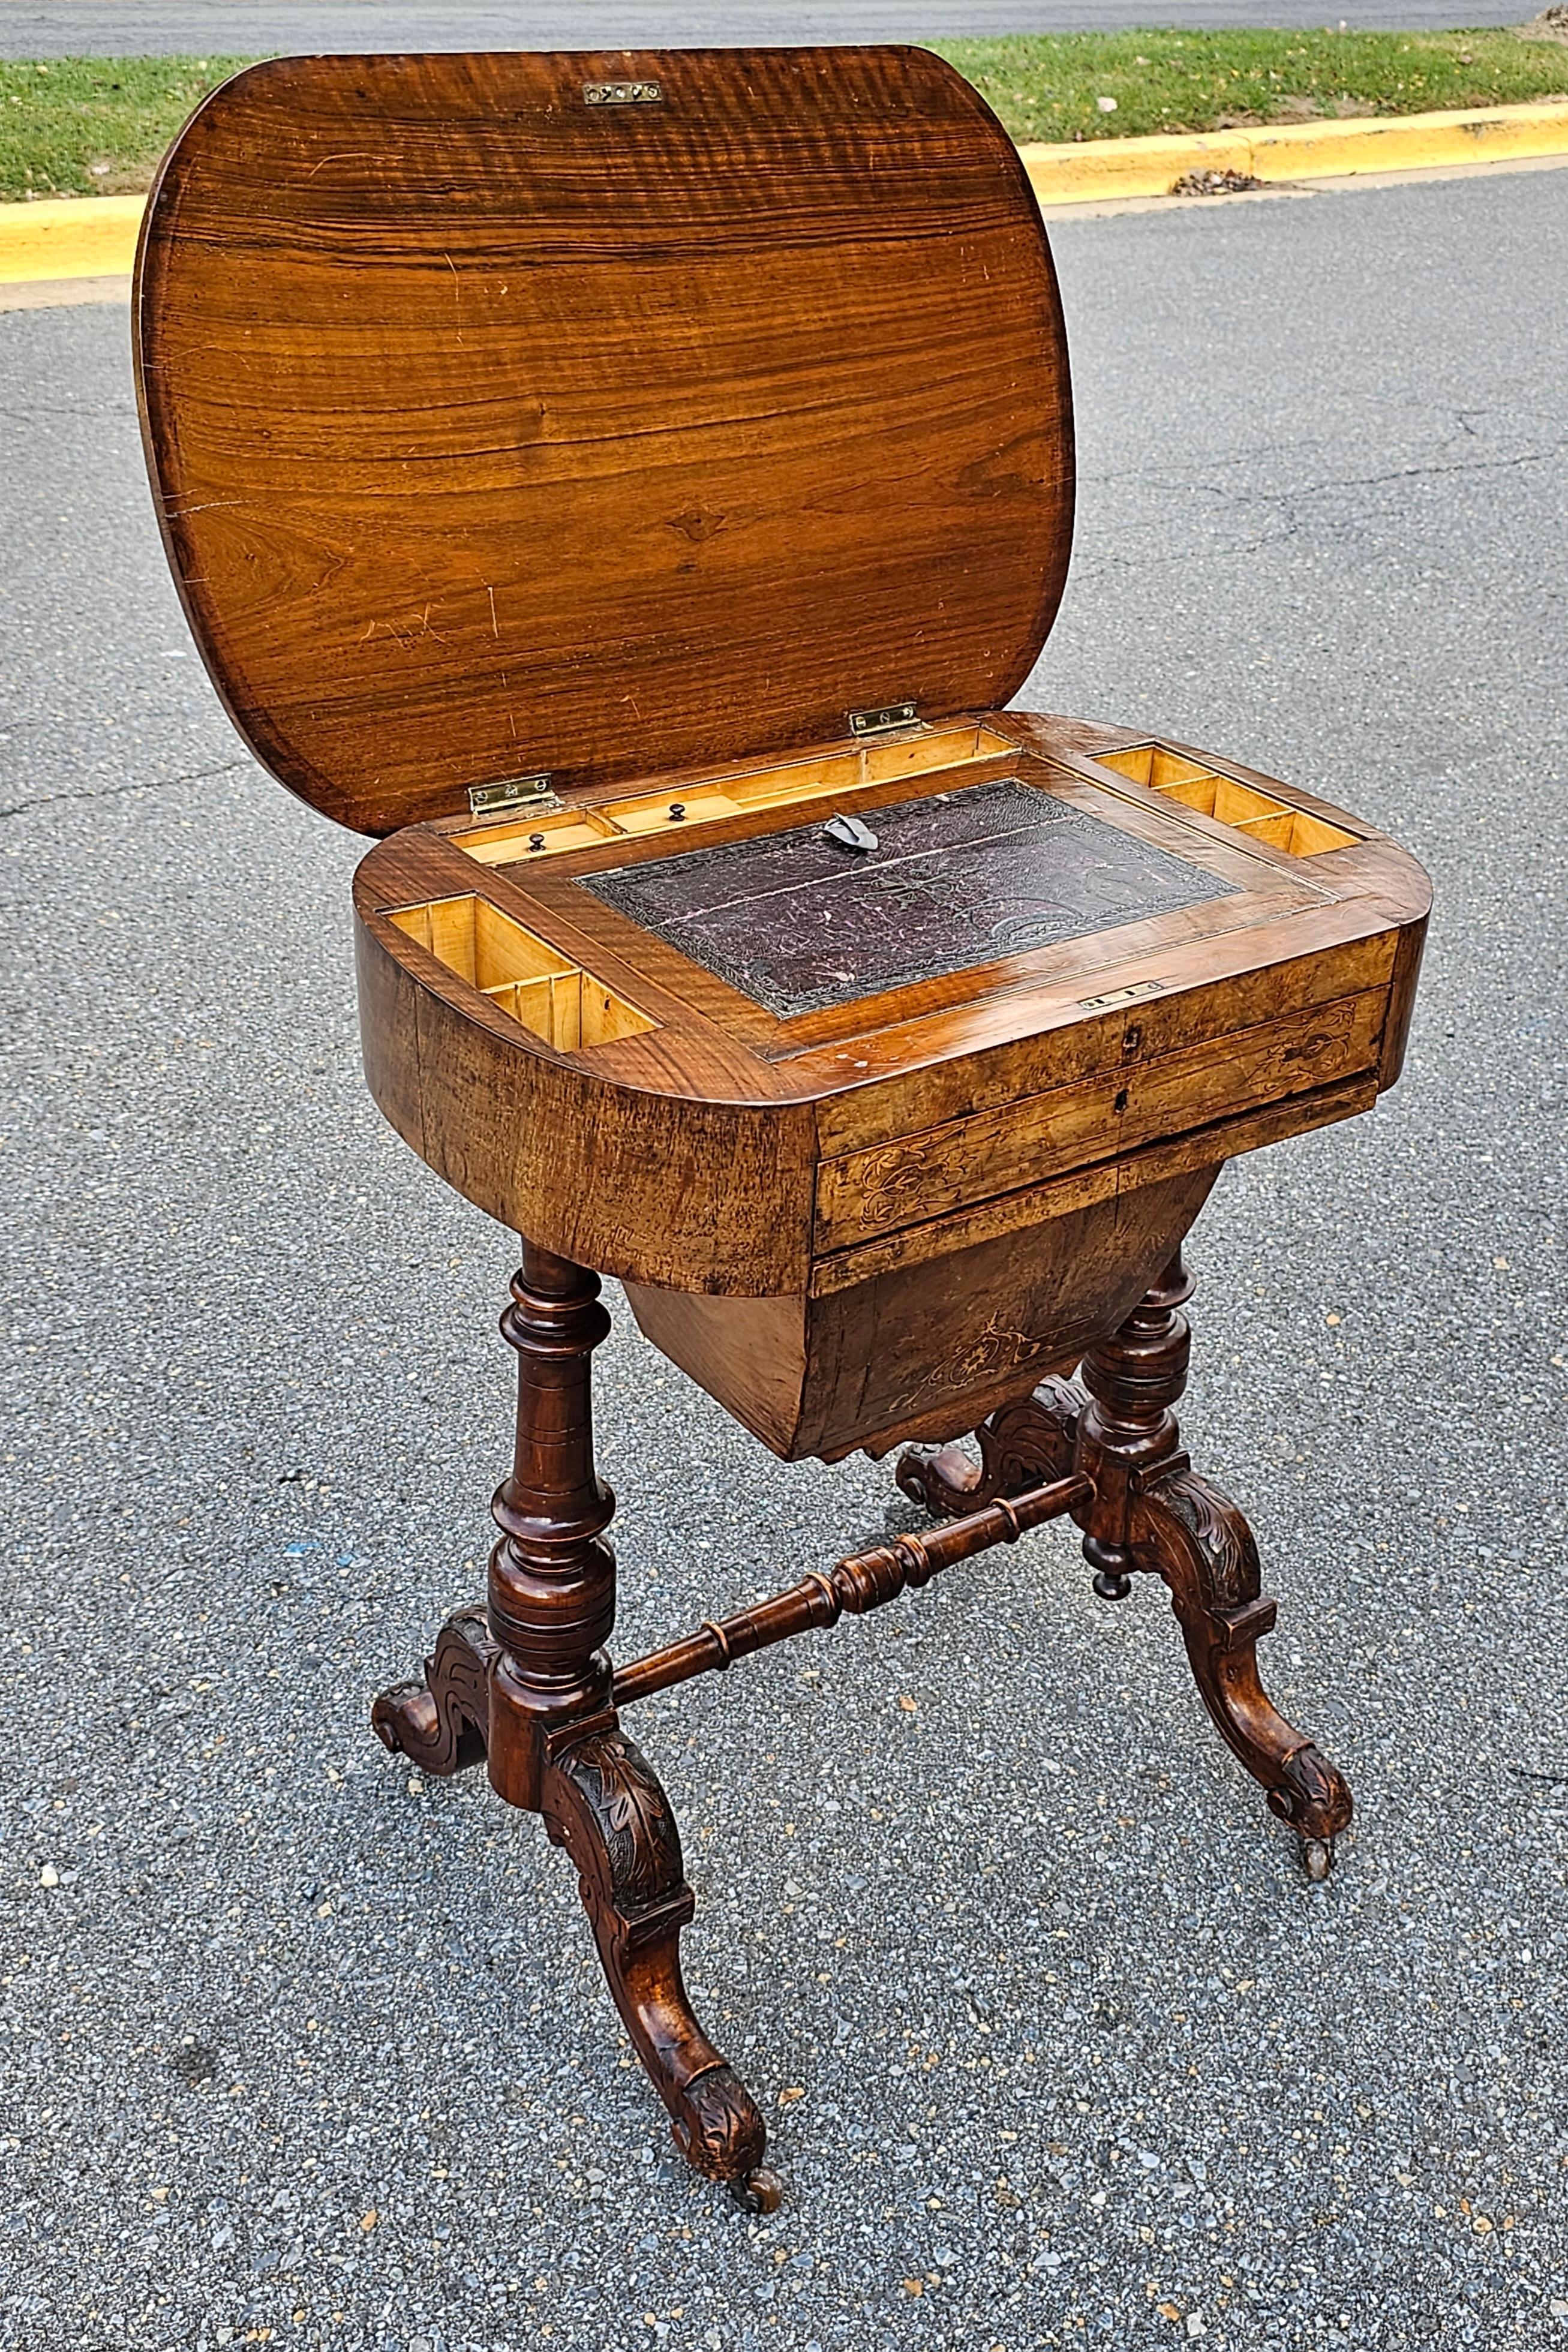 19th Century Victorian Marquetry Burl Walnut Sewing Table In Good Condition For Sale In Germantown, MD